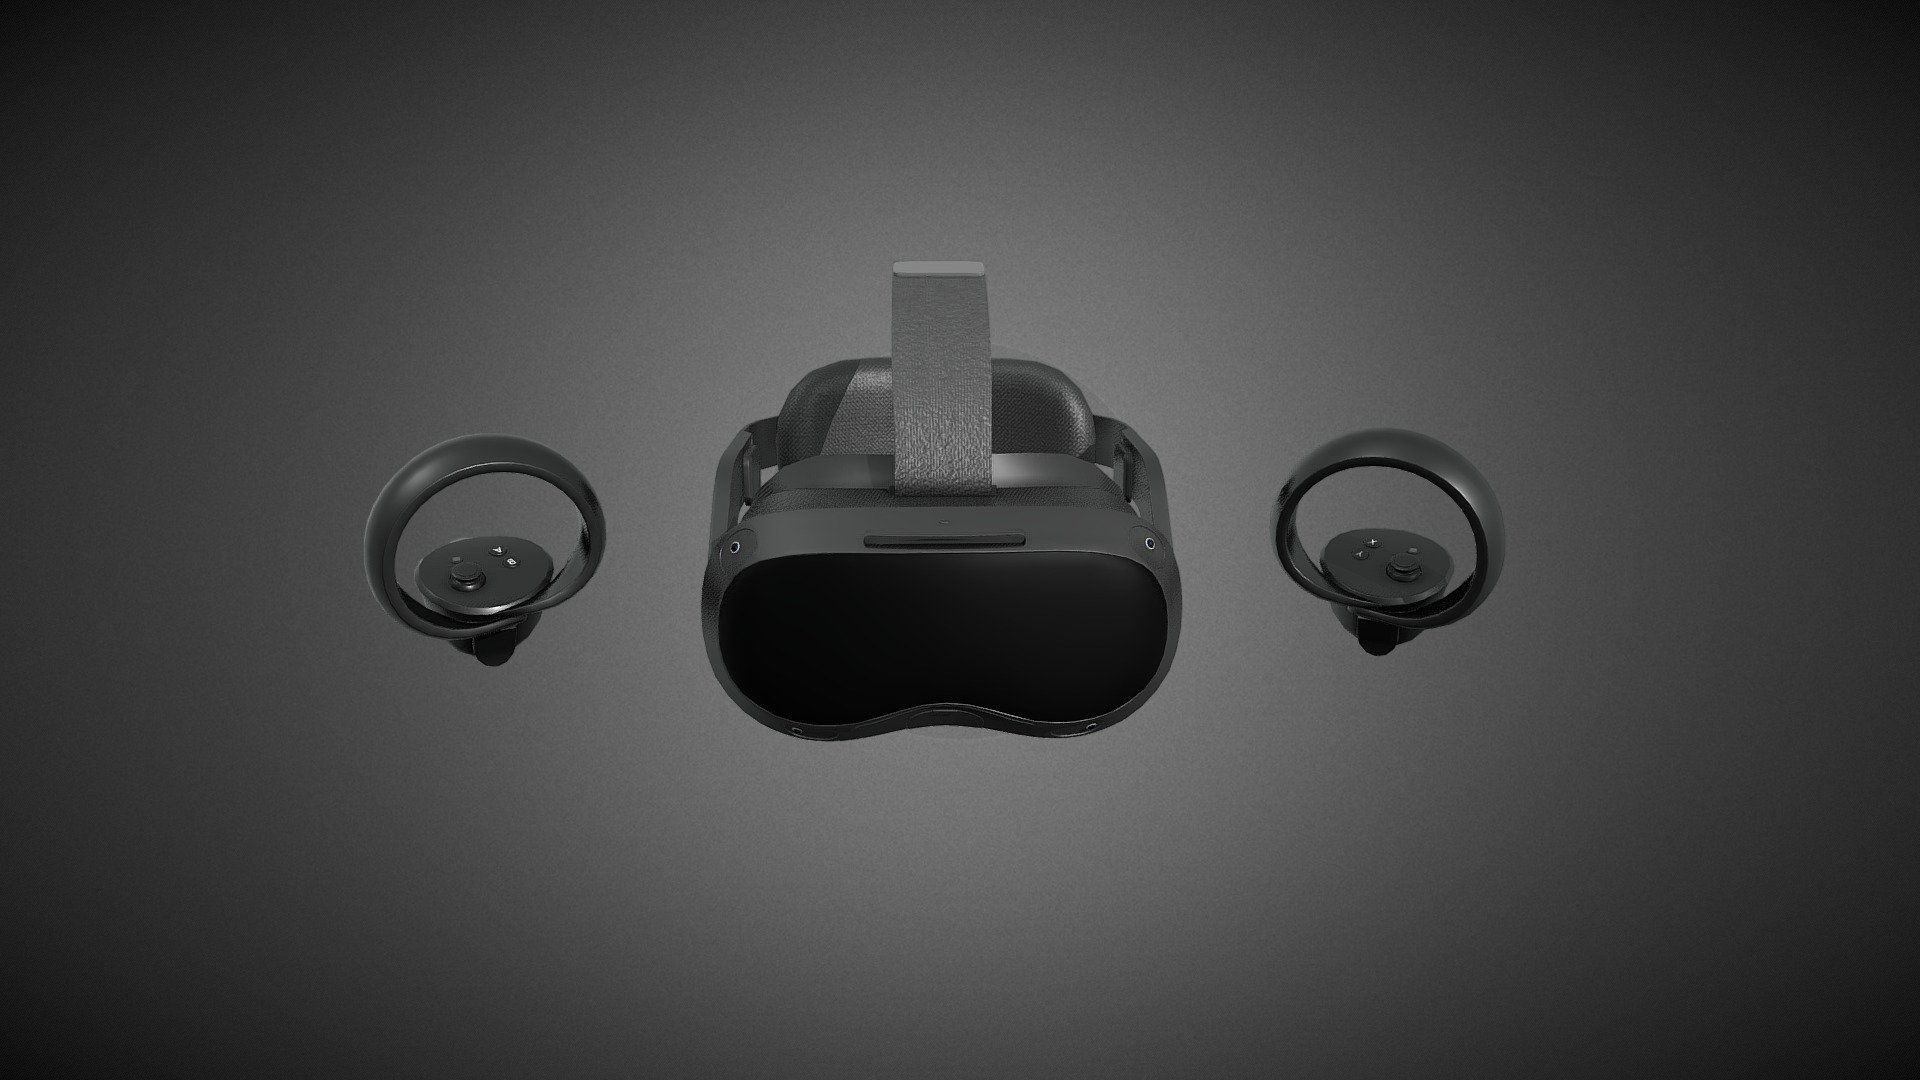 HTC Vive Focus 3 contains low poly 3D models of VR Device with High Quality textures to fill up your game environment. The assets are VR-Ready and game ready.

Total Polygons - 14092

Total Tris - 28074

These models are delivered without any brandings or logos attached. The End users/Buyers are solely responsible for ensuring compliance with any branding or trademark requirements applicable to their specific projects.

For Unity3d (Built-in, URP, HDRP) Ready Assets visit our Unity Asset Store Page

Enjoy and please rate the asset!

Contact us on for AR/VR related queries and development support

Gmail - designer@devdensolutions.com

Website

Instagram

Facebook

Linkedin

Youtube

Buy Pizza - HTC Vive focus 3 - Buy Royalty Free 3D model by Devden 3d model